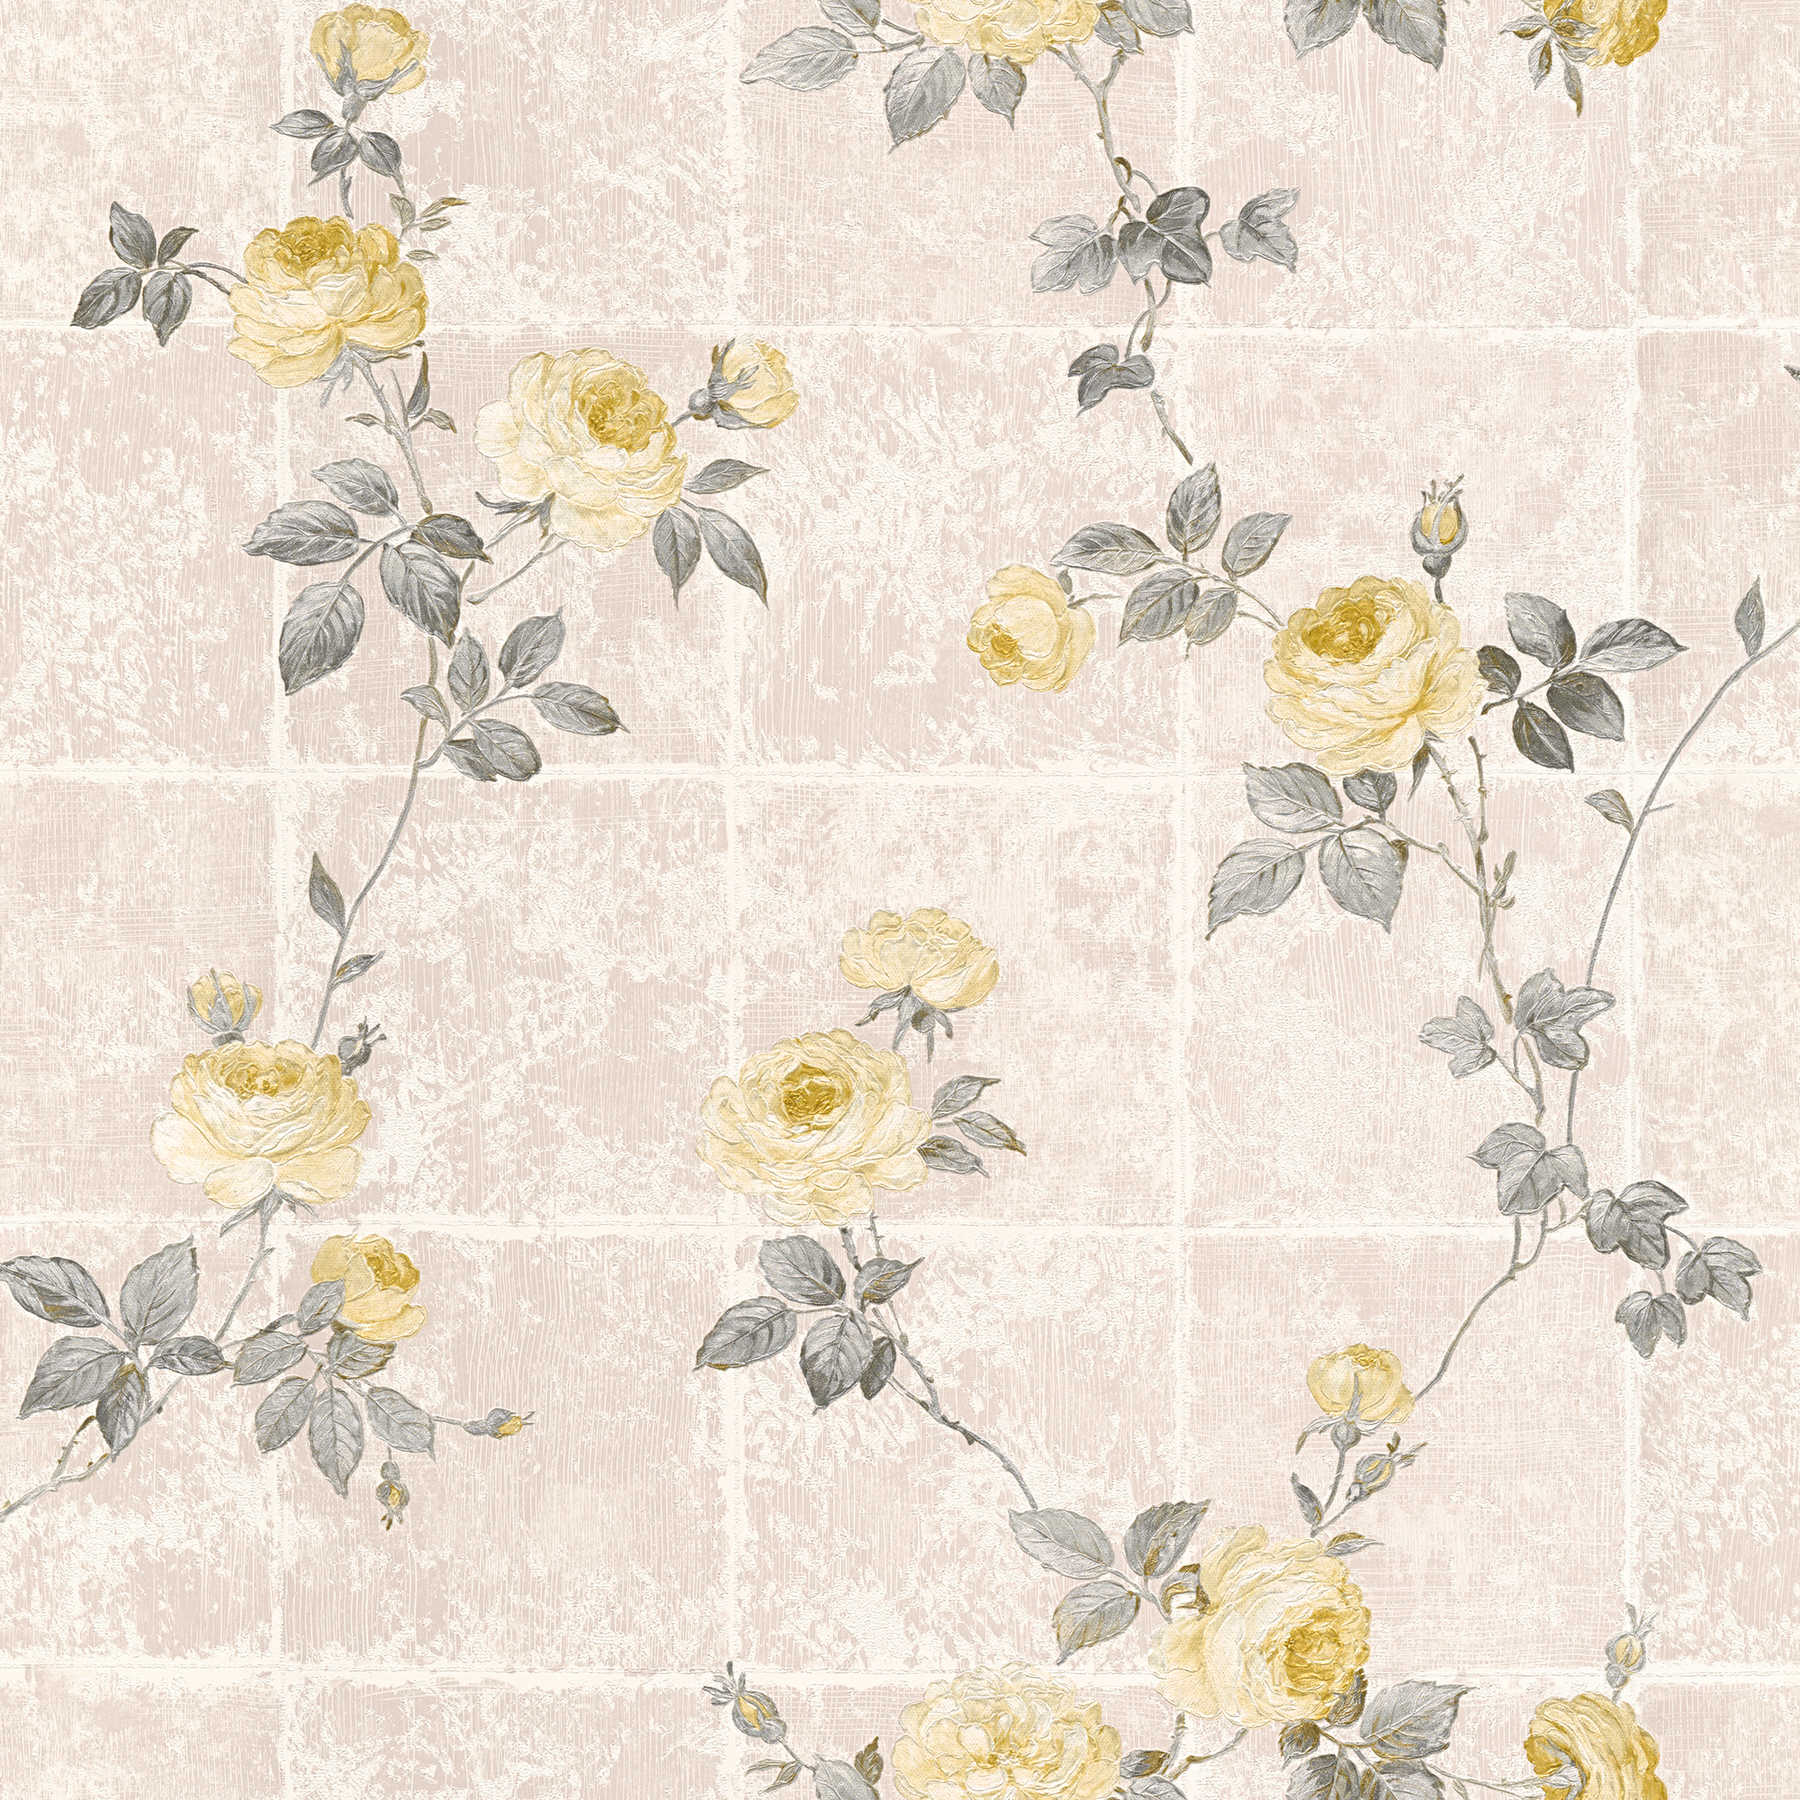 Country style wallpaper tile pattern and roses - yellow, beige
